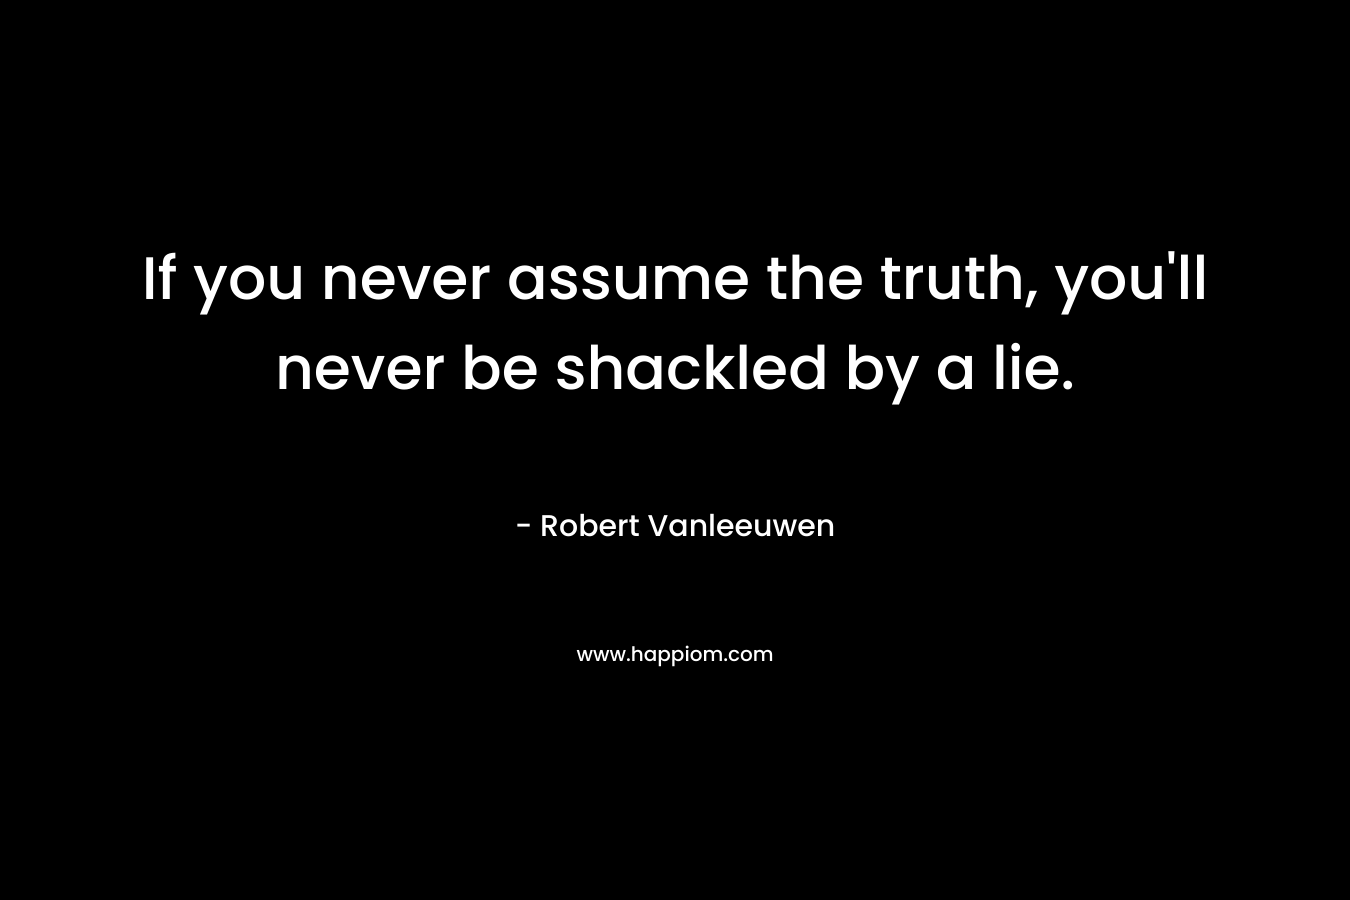 If you never assume the truth, you’ll never be shackled by a lie. – Robert Vanleeuwen